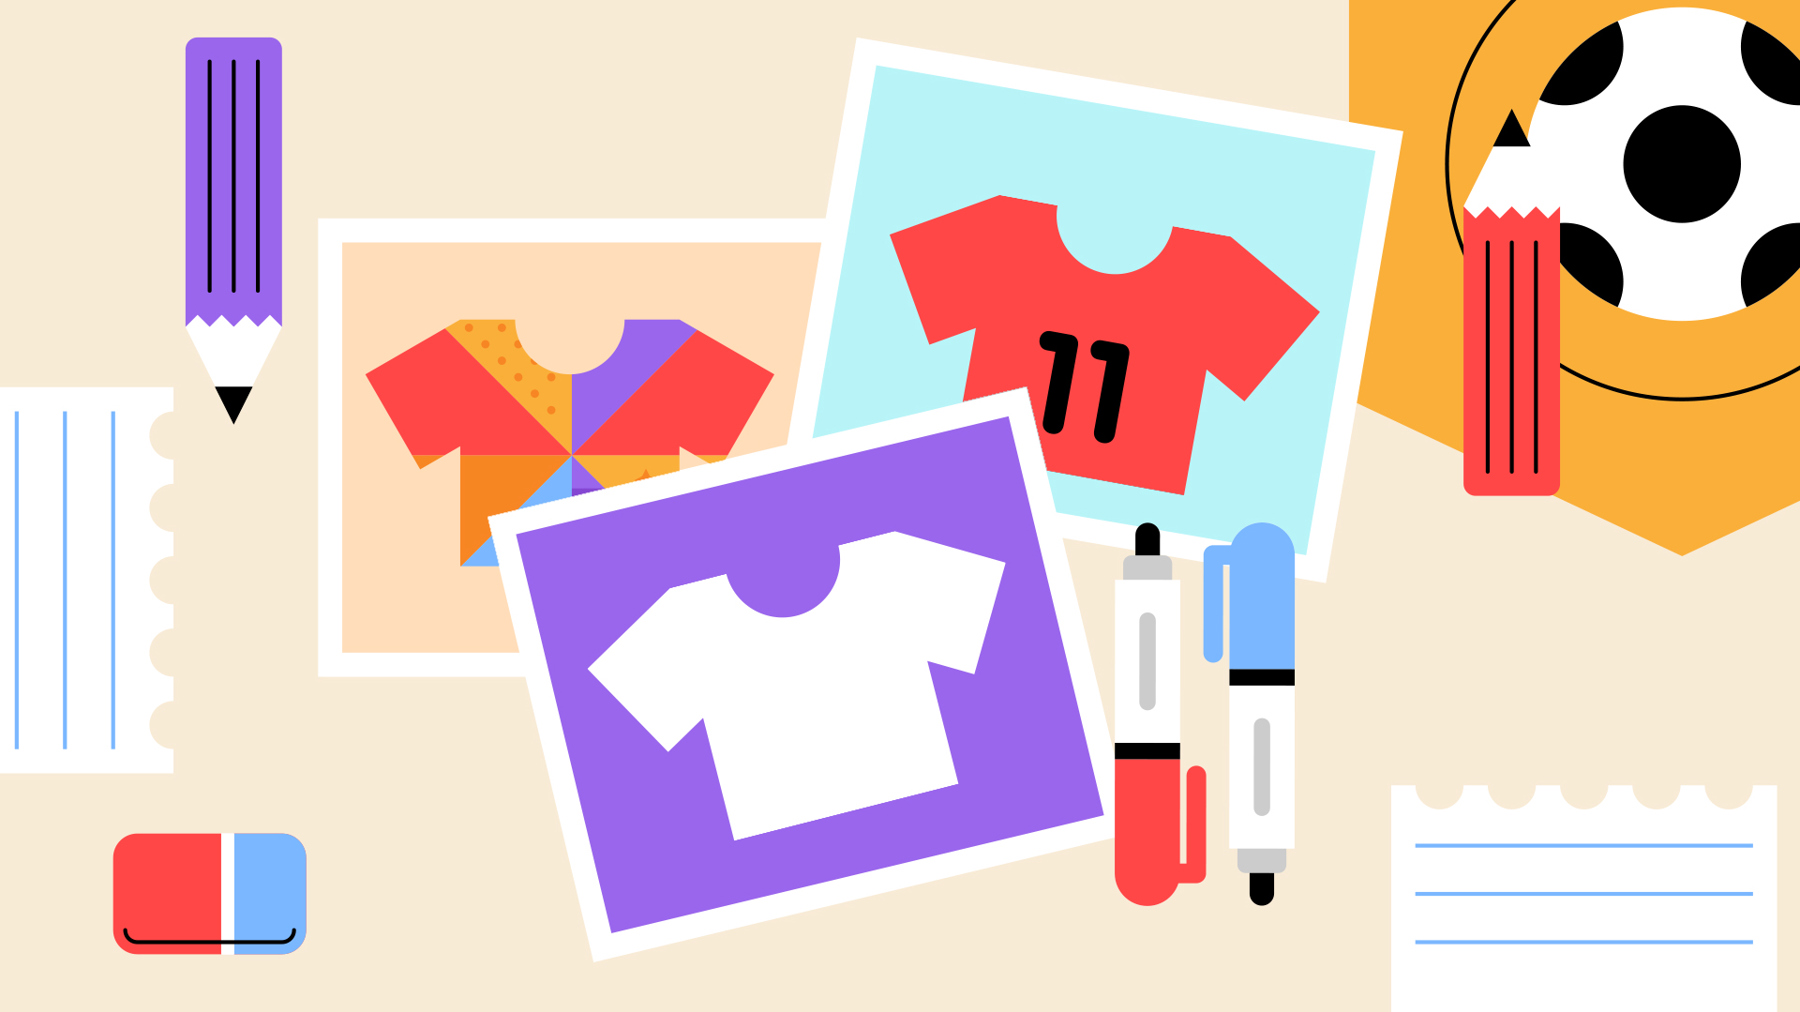 A collection of three images of football shirts with varying designs.